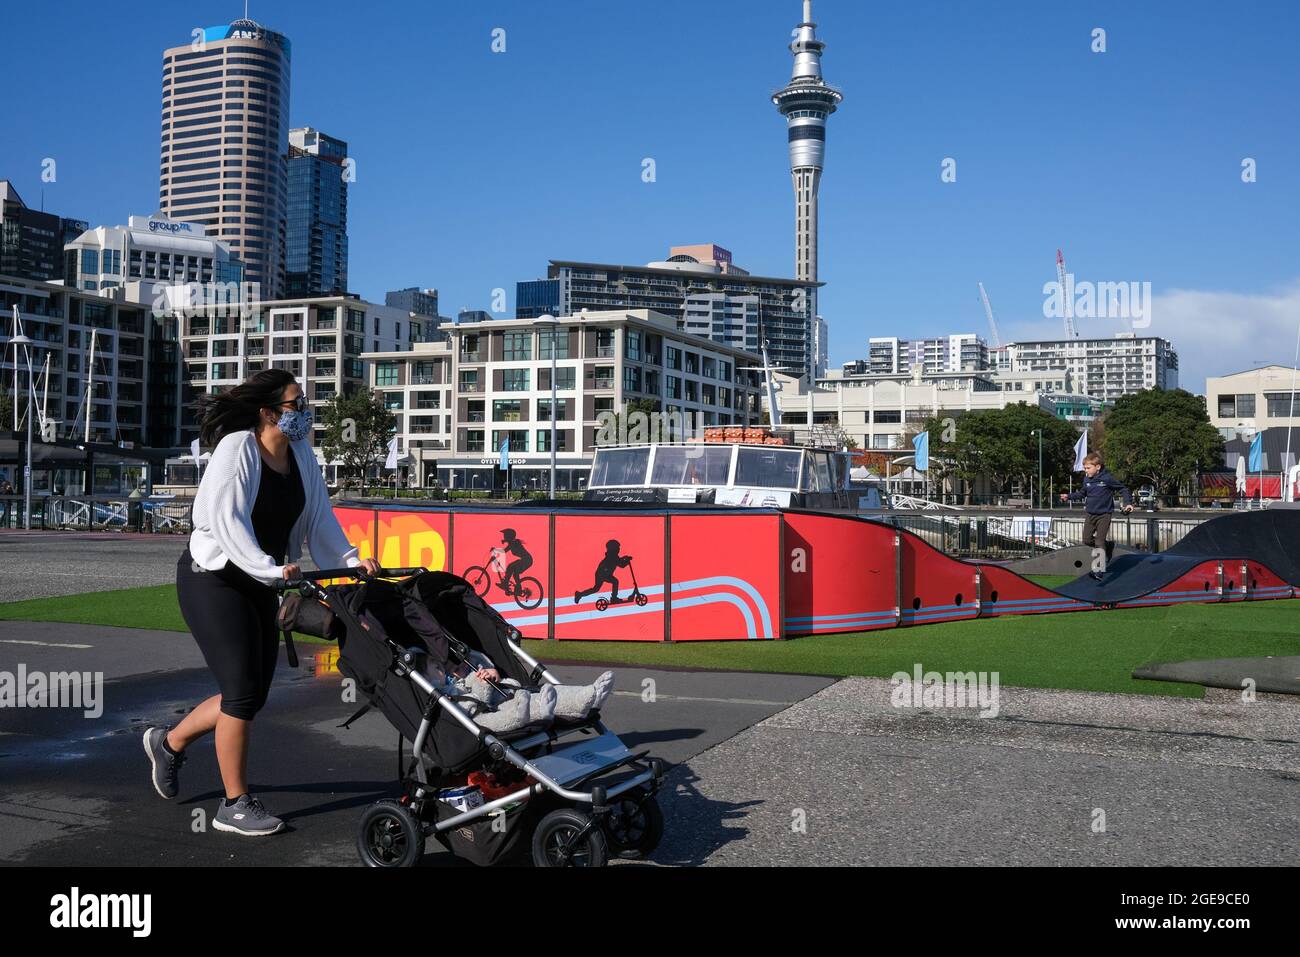 Auckland, New Zealand. 18th Aug, 2021. A woman wearing a face mask walks with a stroller on the street in Auckland, New Zealand, Aug. 18, 2021. New Zealand confirmed three more Delta cases of COVID-19 in the community, bringing the total number of community cases to 10 on Wednesday, including one fully-vaccinated nurse from an Auckland hospital. Credit: Zhao Gang/Xinhua/Alamy Live News Stock Photo